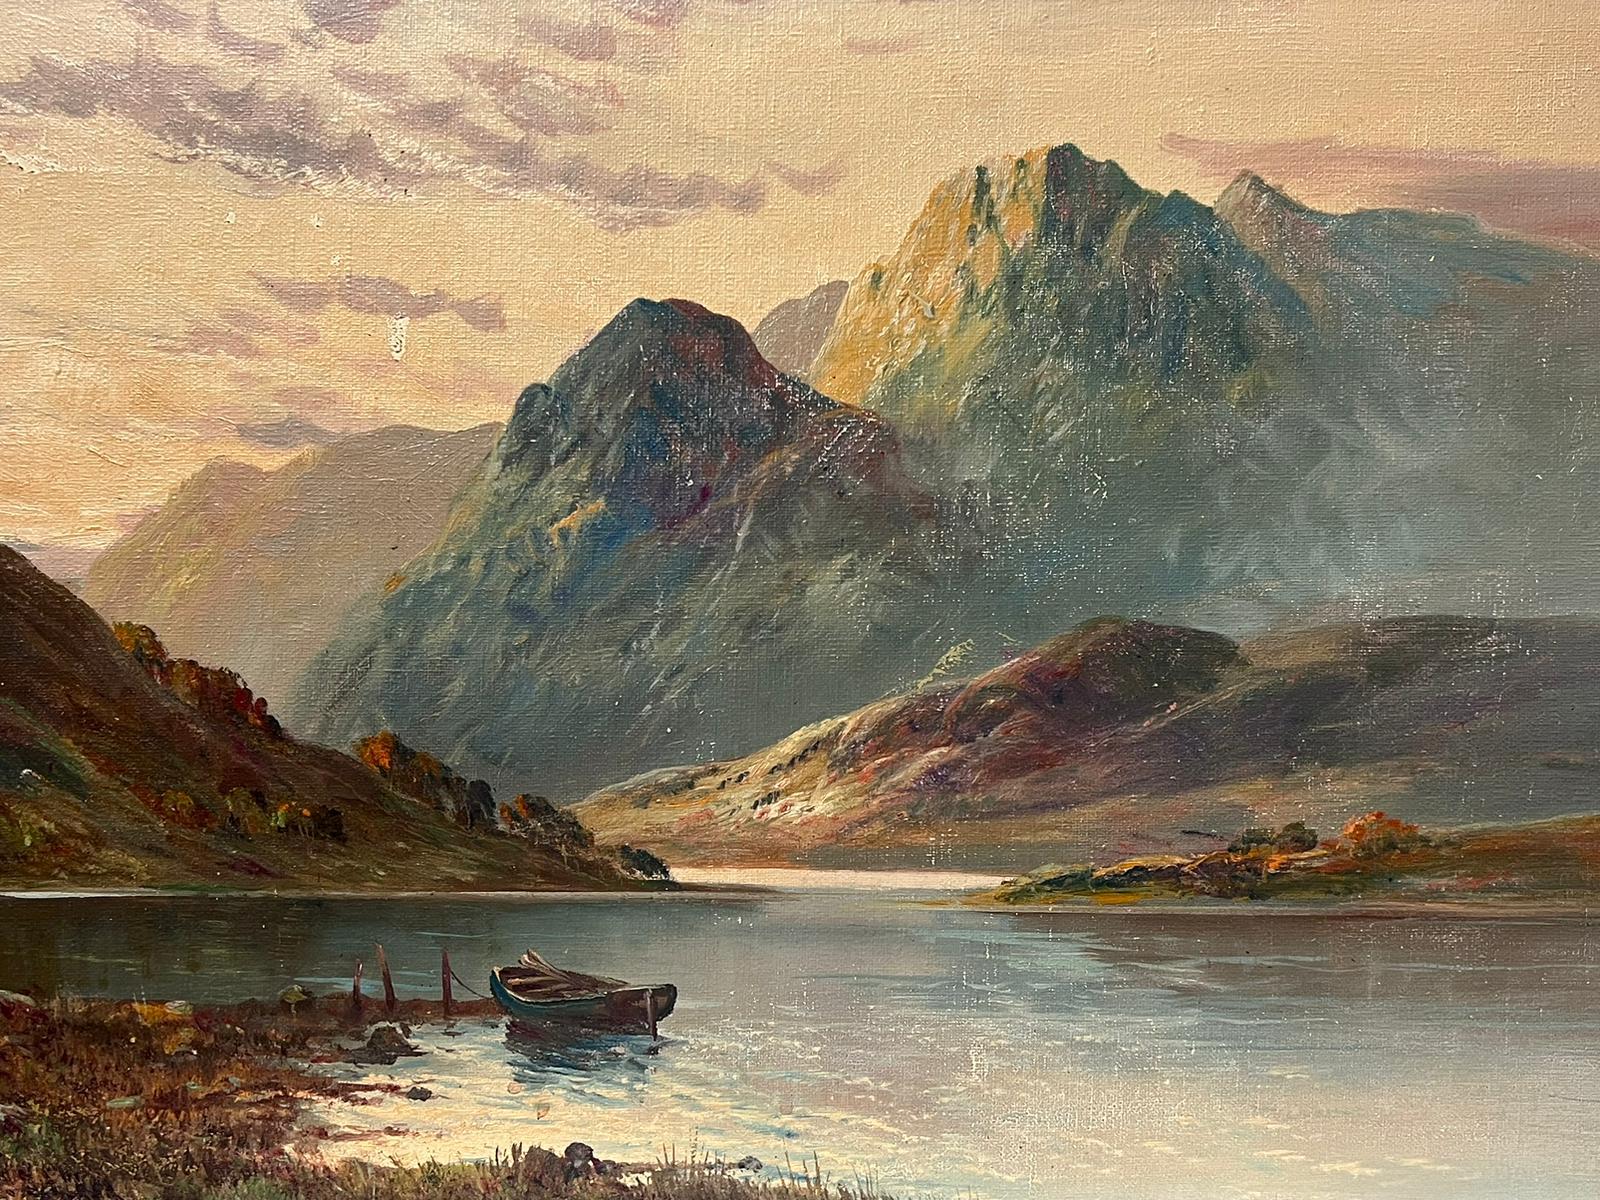 Artist/ School: F. E. Jamieson British, signed

Title: Dusk in the Highlands

Medium: Oil on canvas, framed

Size:
framed: 20 x 28 inches
canvas : 16 x 24 inches

Provenance: from a collection in England. 

Condition: The painting is in overall very